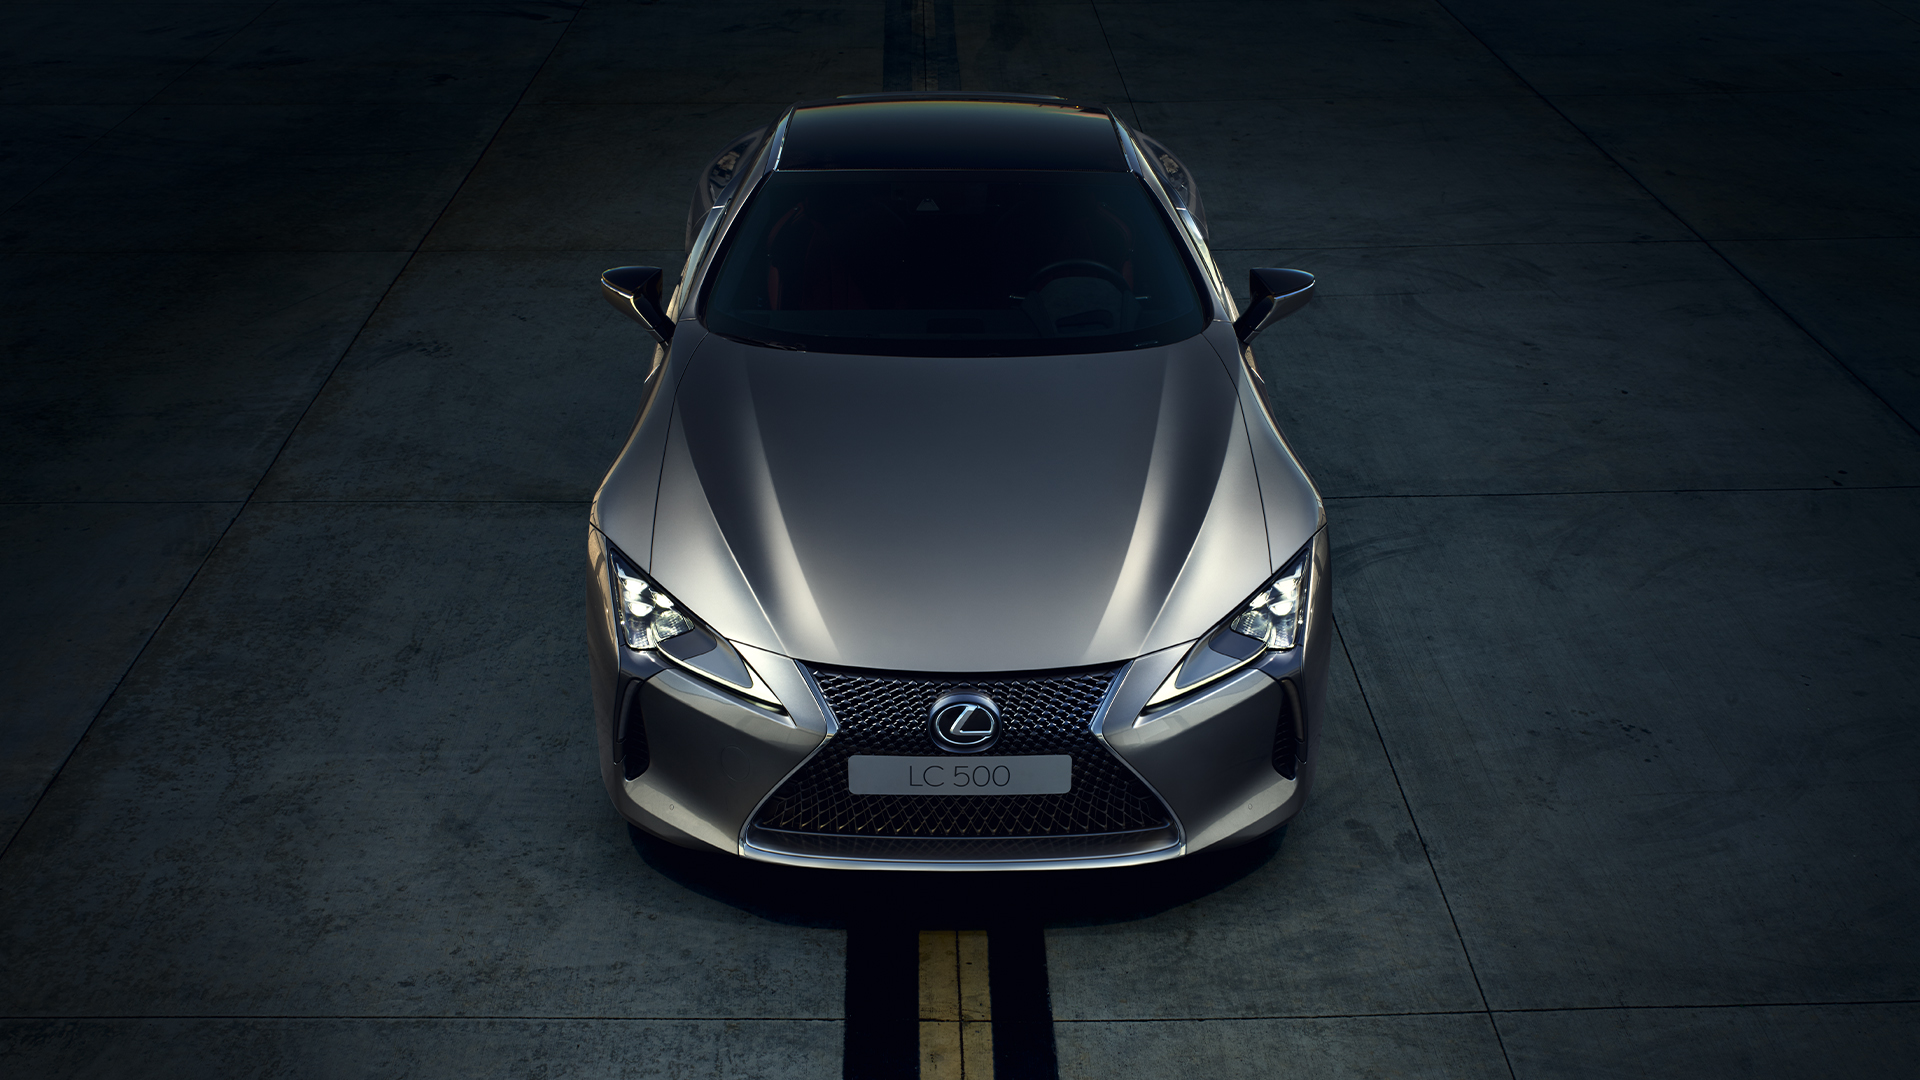 Raised frontal view of the Lexus LC 500 